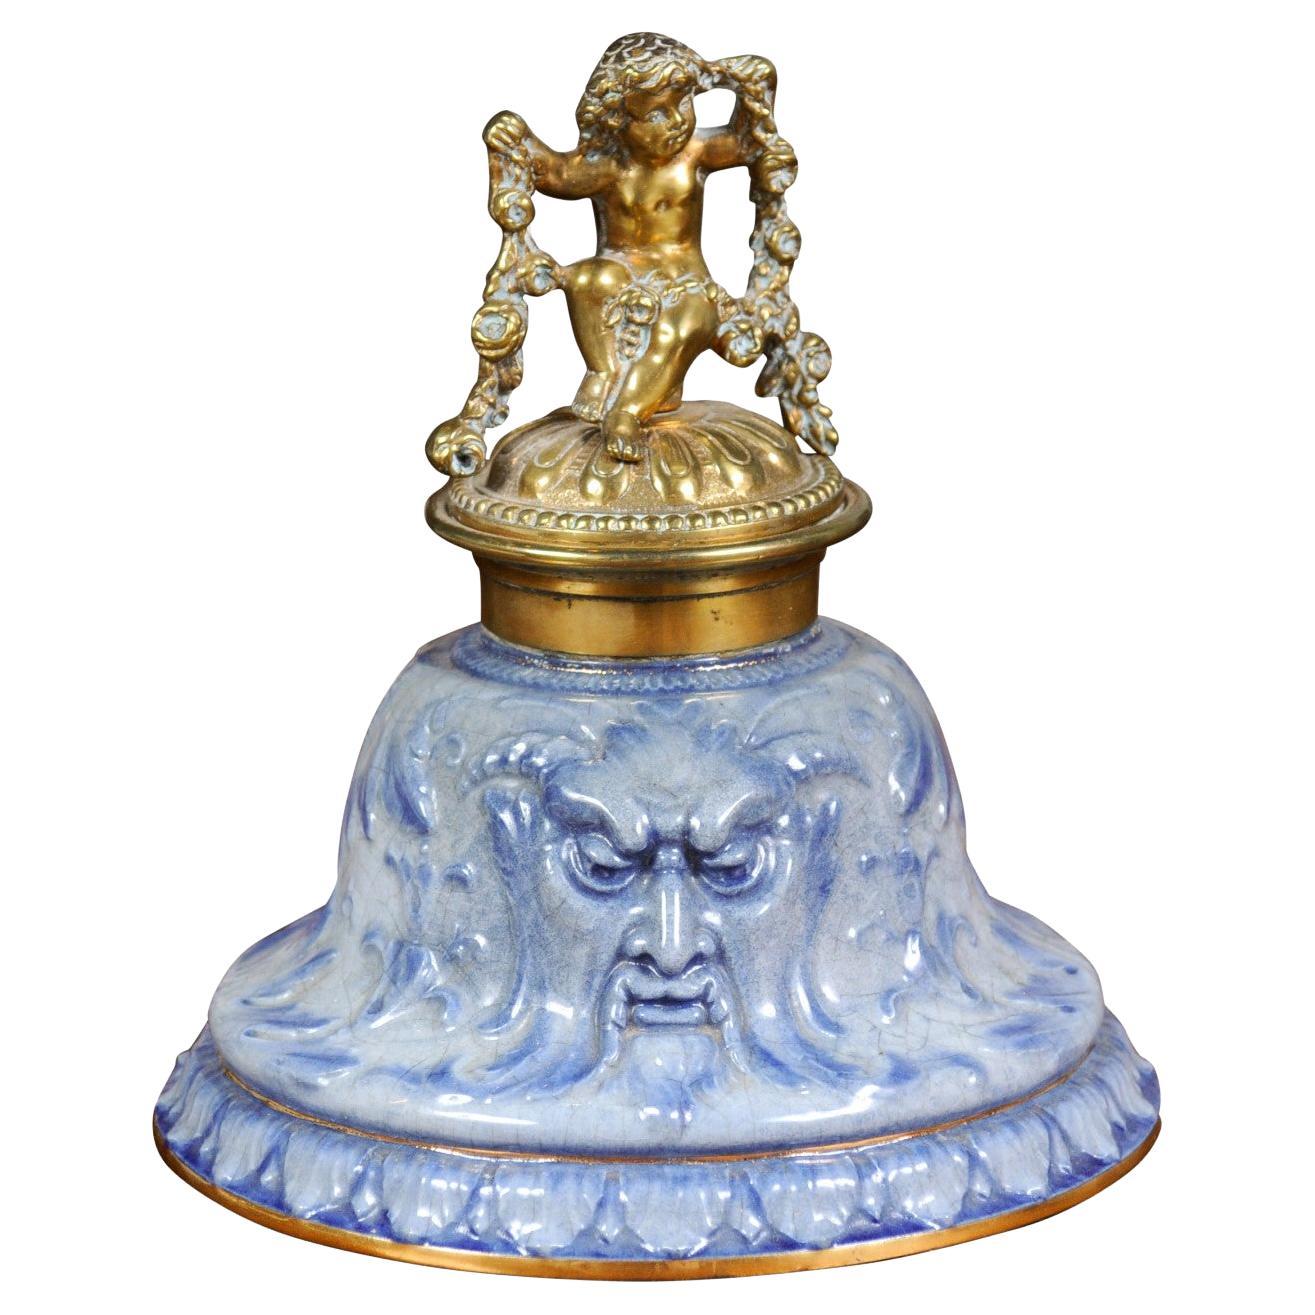 English Victorian Period 19th Century Porcelain Inkwell with Brass Putto Motif For Sale